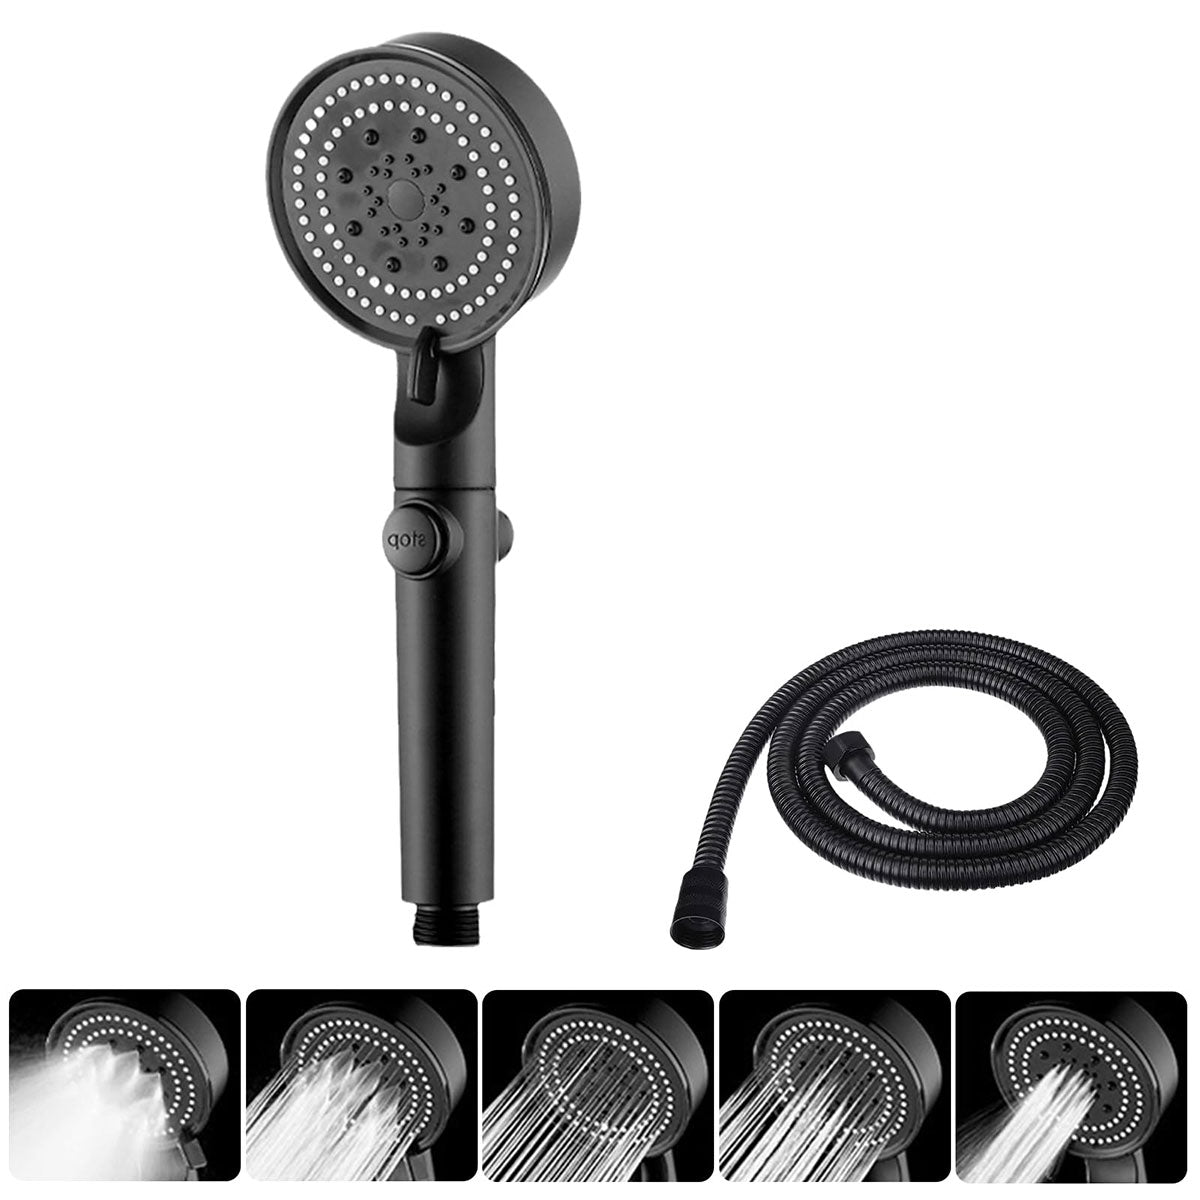 High Pressure Shower Head with 5 Spray Modes and ON/Off Switch